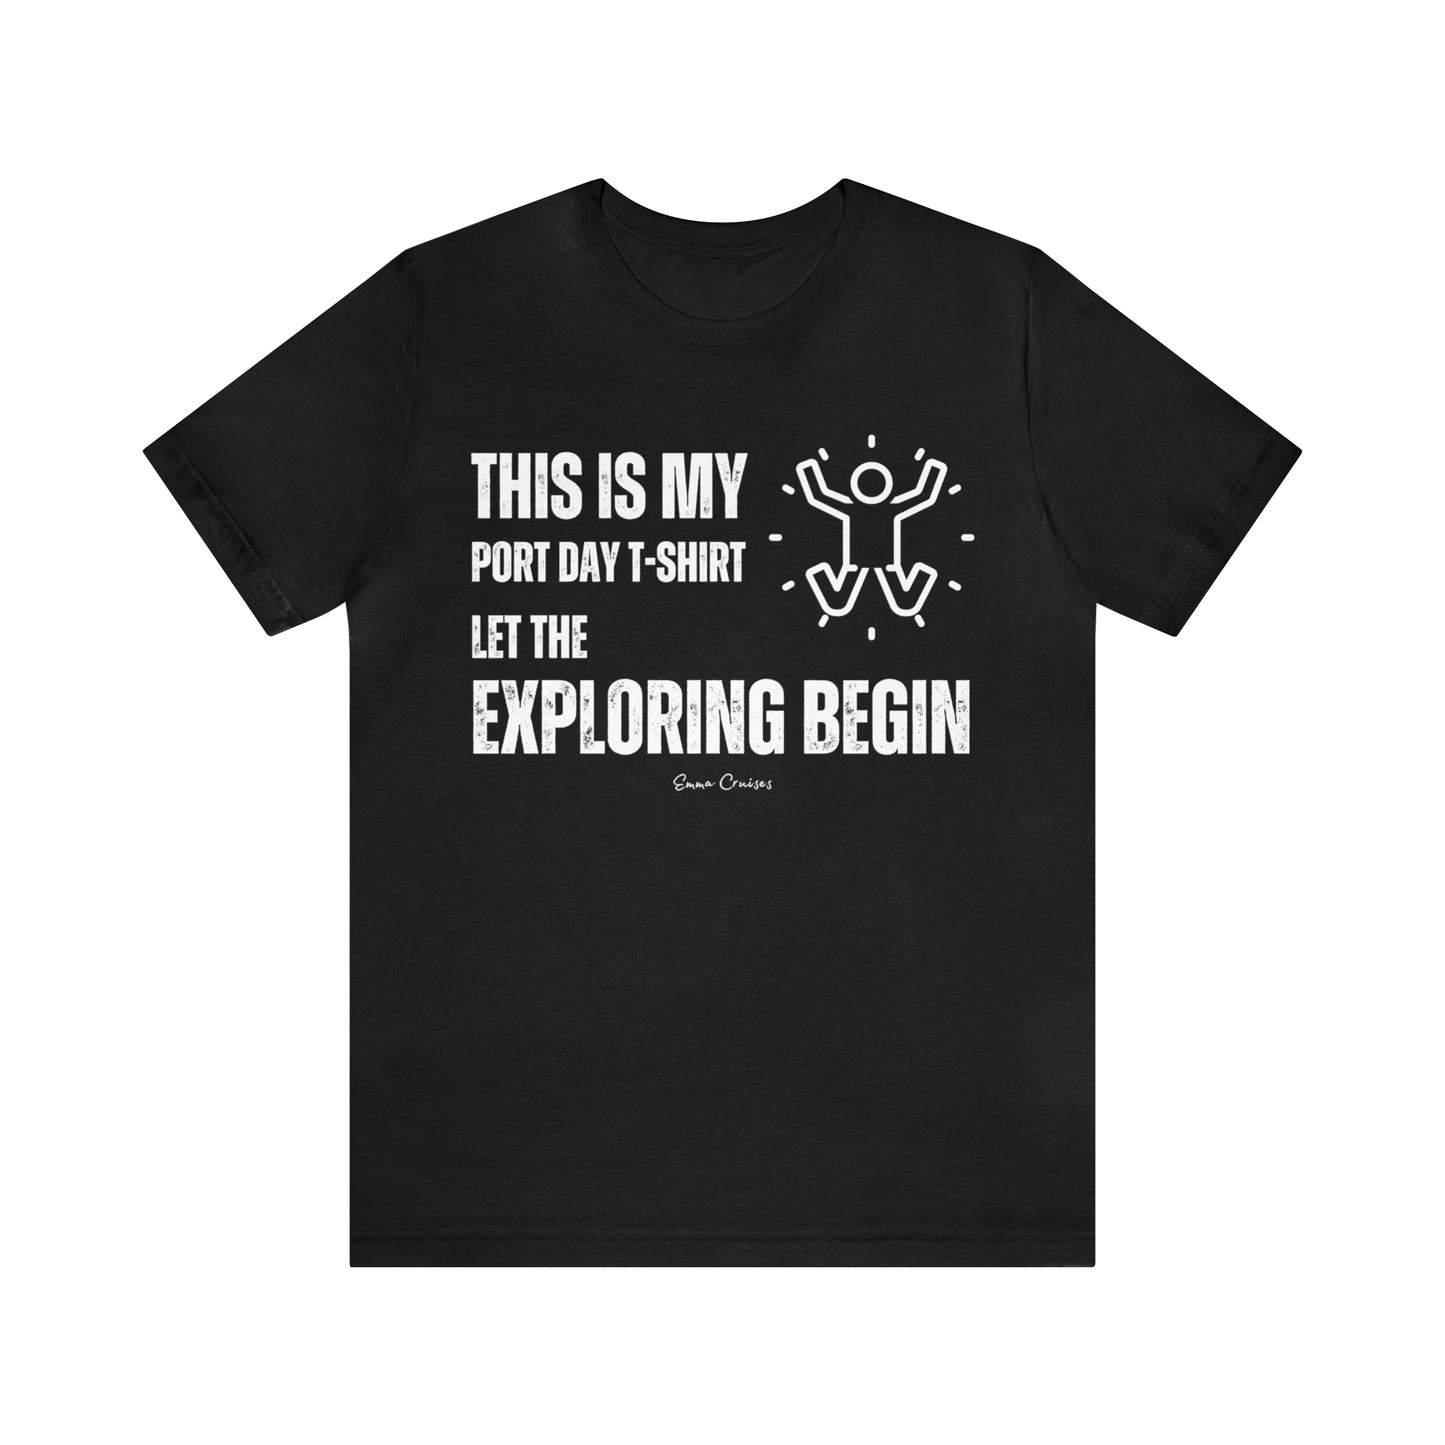 This is My Port Day T-Shirt - UNISEX T-Shirt